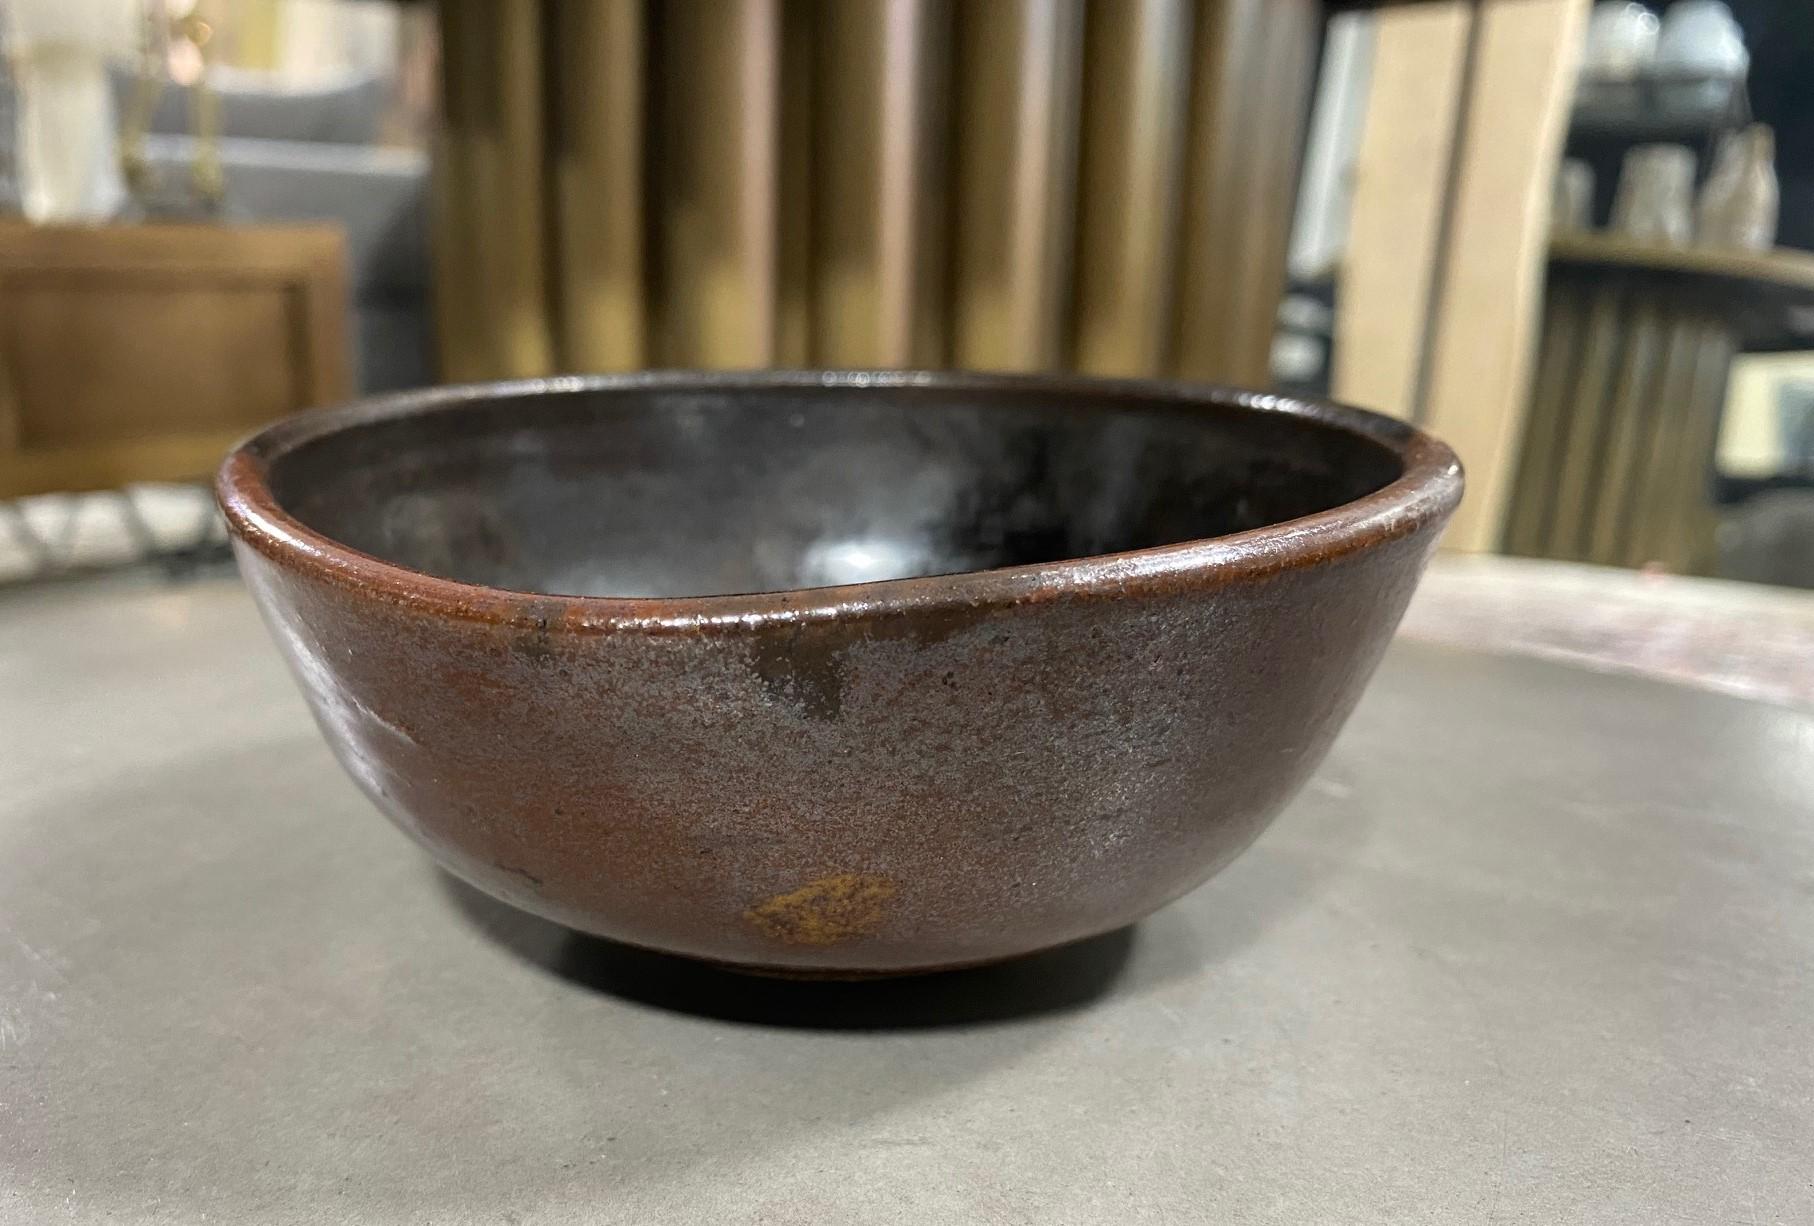 An absolutely gorgeous and wonderful footed chawan tea bowl by famed Japanese American pottery master Toshiko Takaezu. This work along with three others we have listed were acquired directly from the artist in the 1970s-90s by a collector who was a